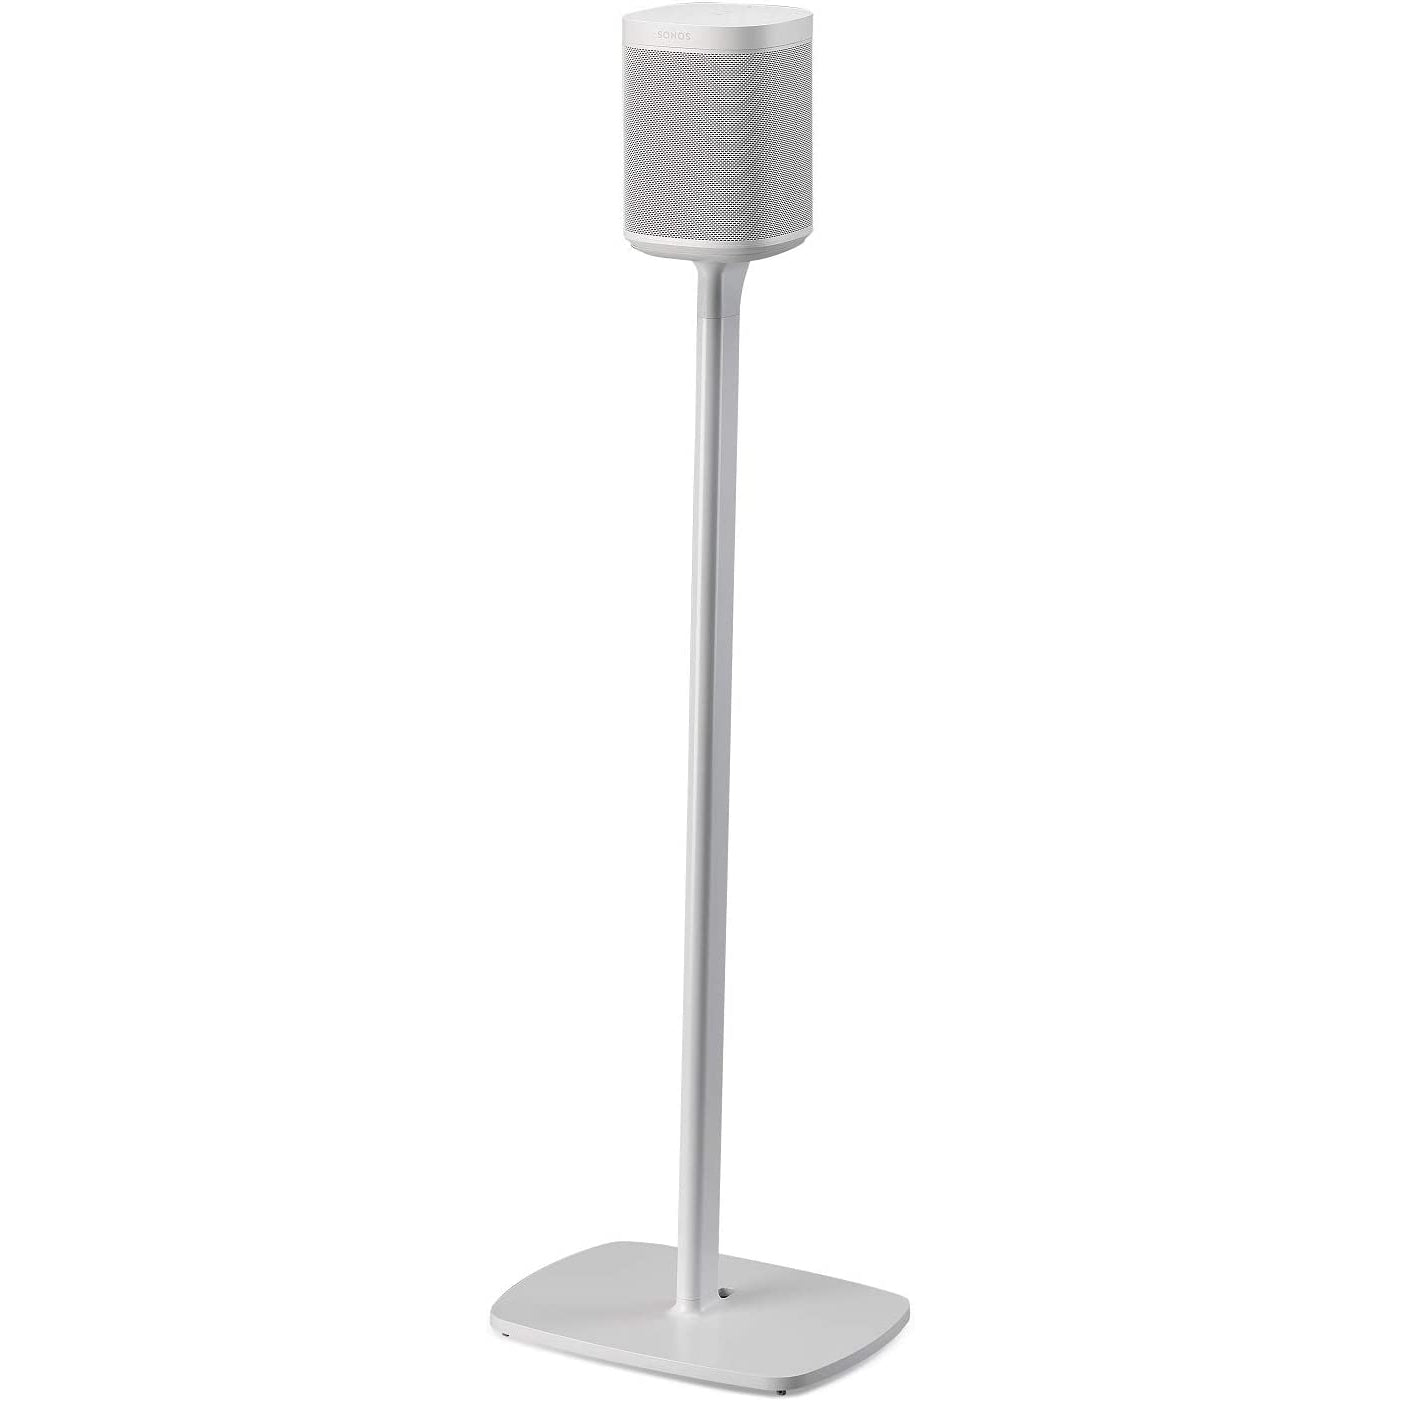 Flexson S1-FS Floor Stand for Sonos One, One SL and Play:1, Black / White